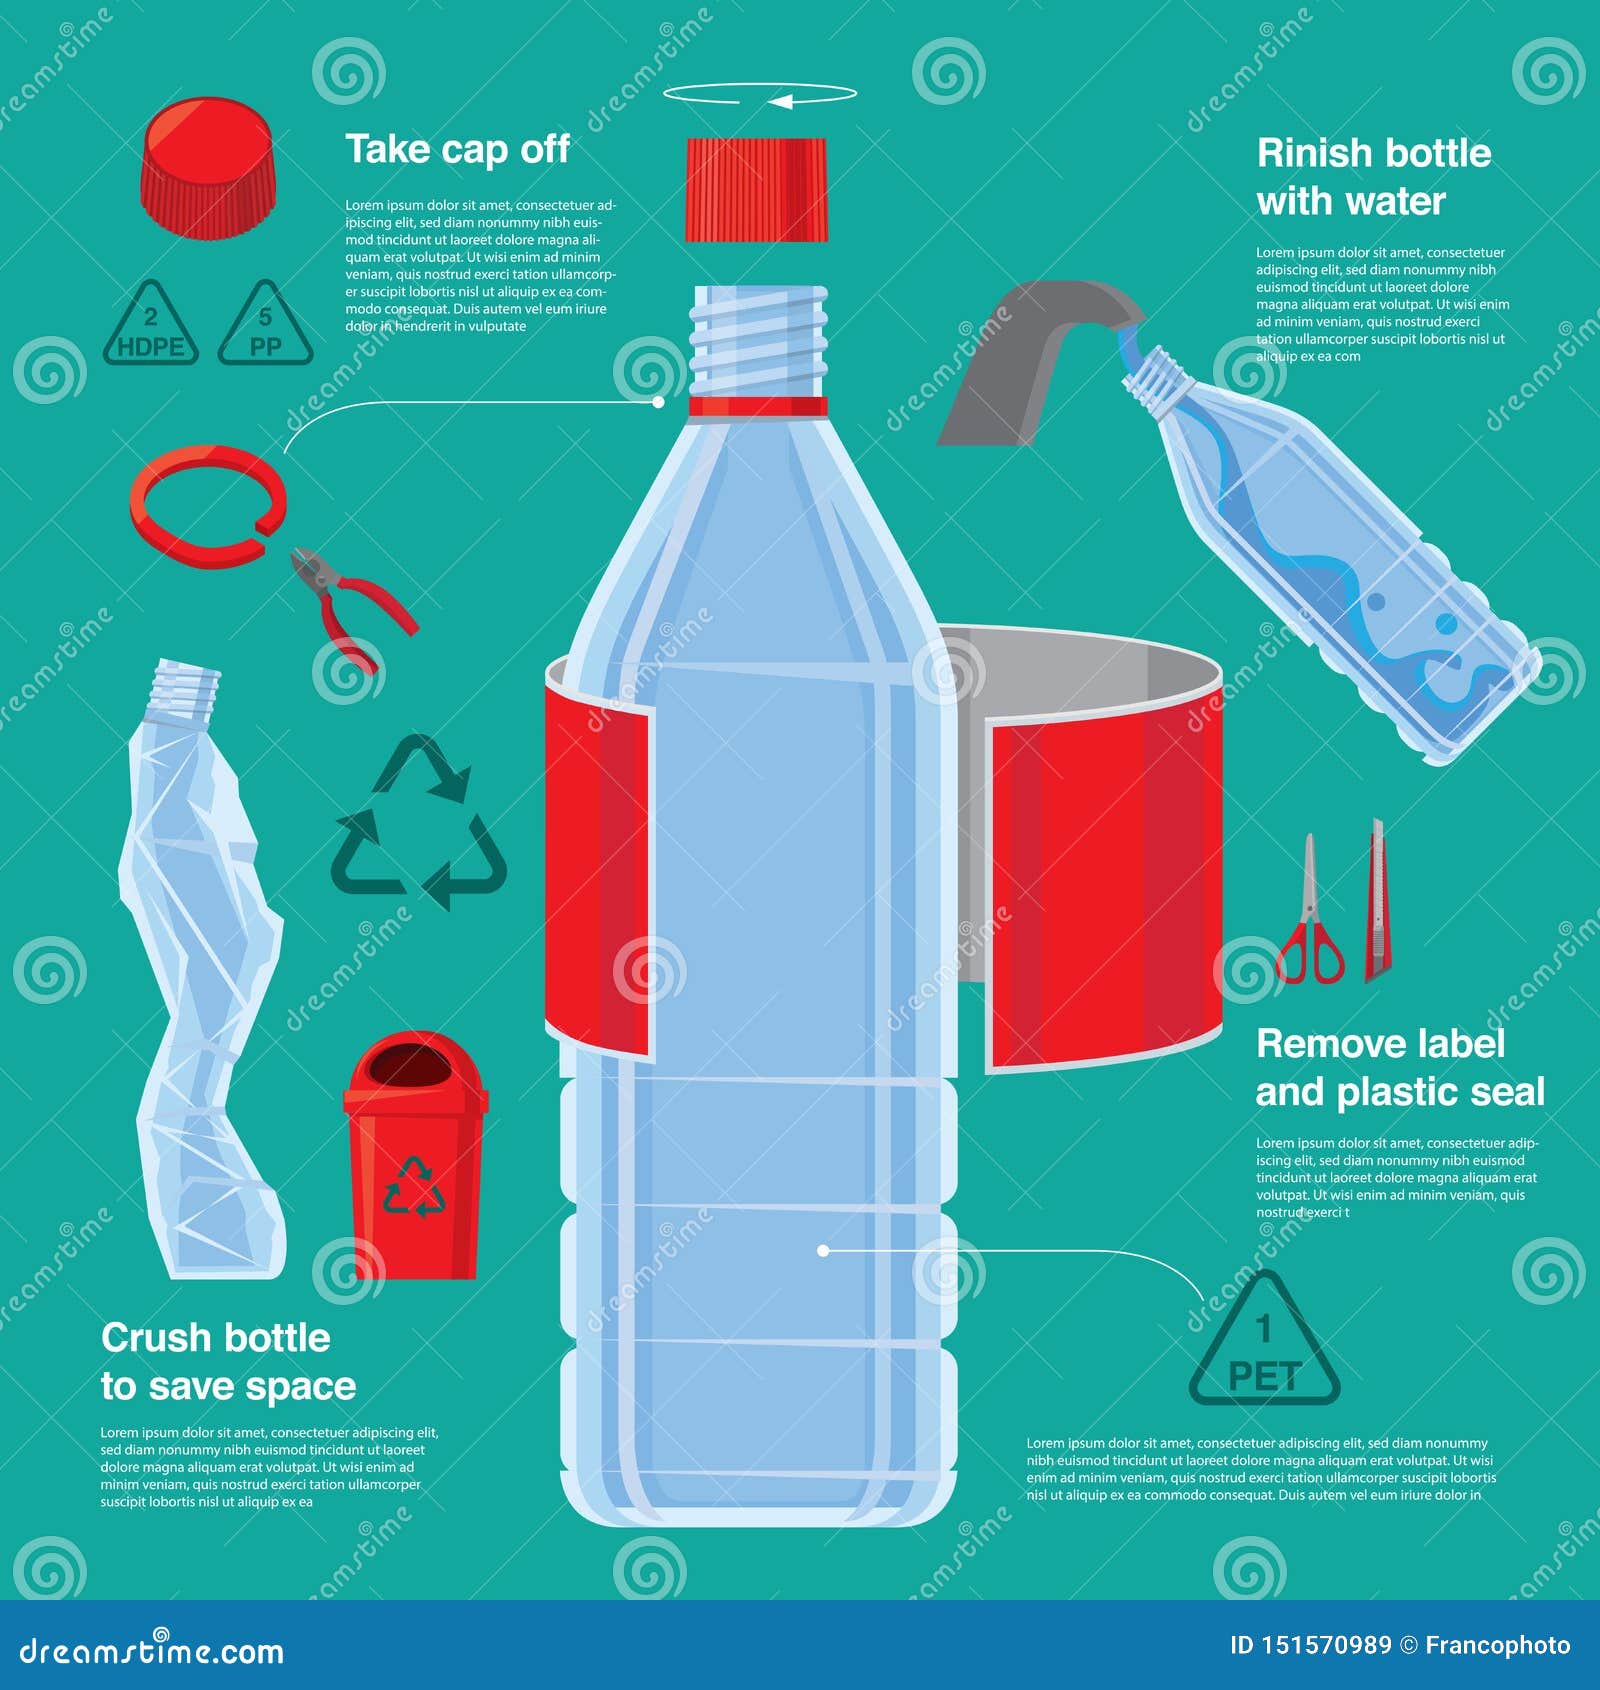 research topics on recycling plastic bottles